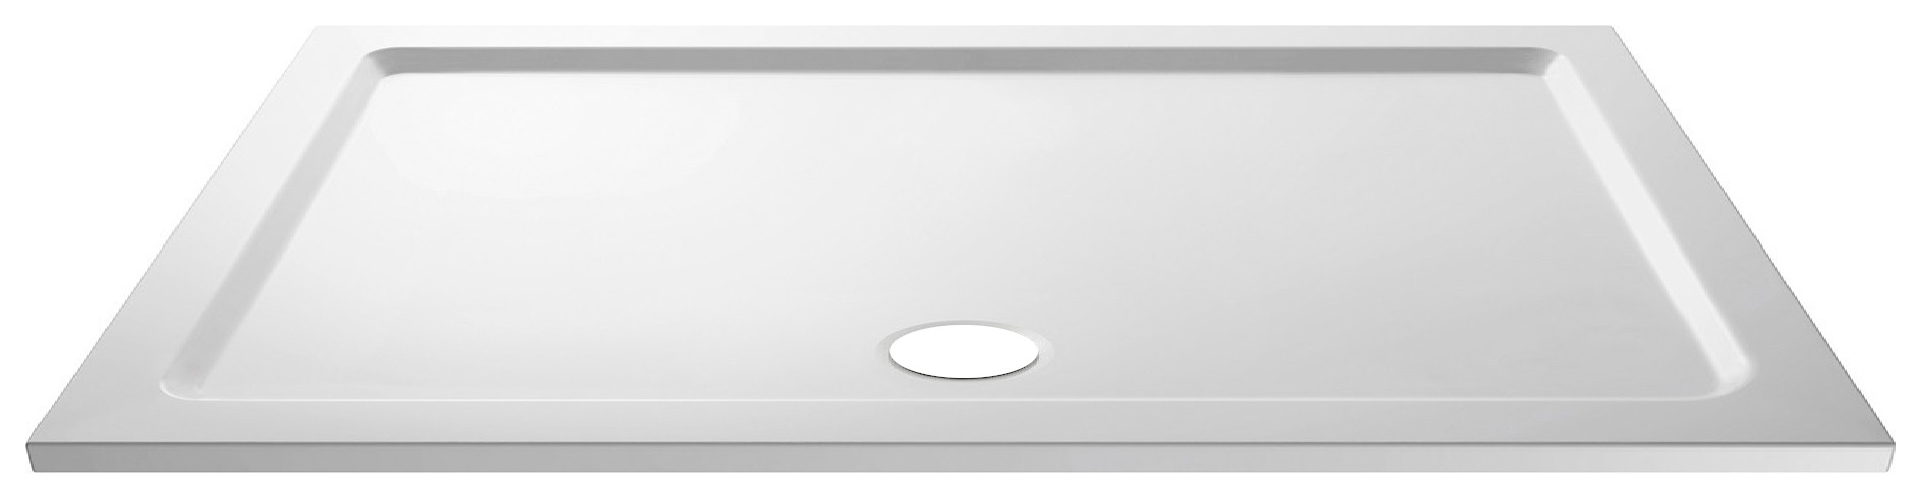 Image of Wickes 40mm Pearlstone Rectangular Shower Tray - 1500 x 800mm